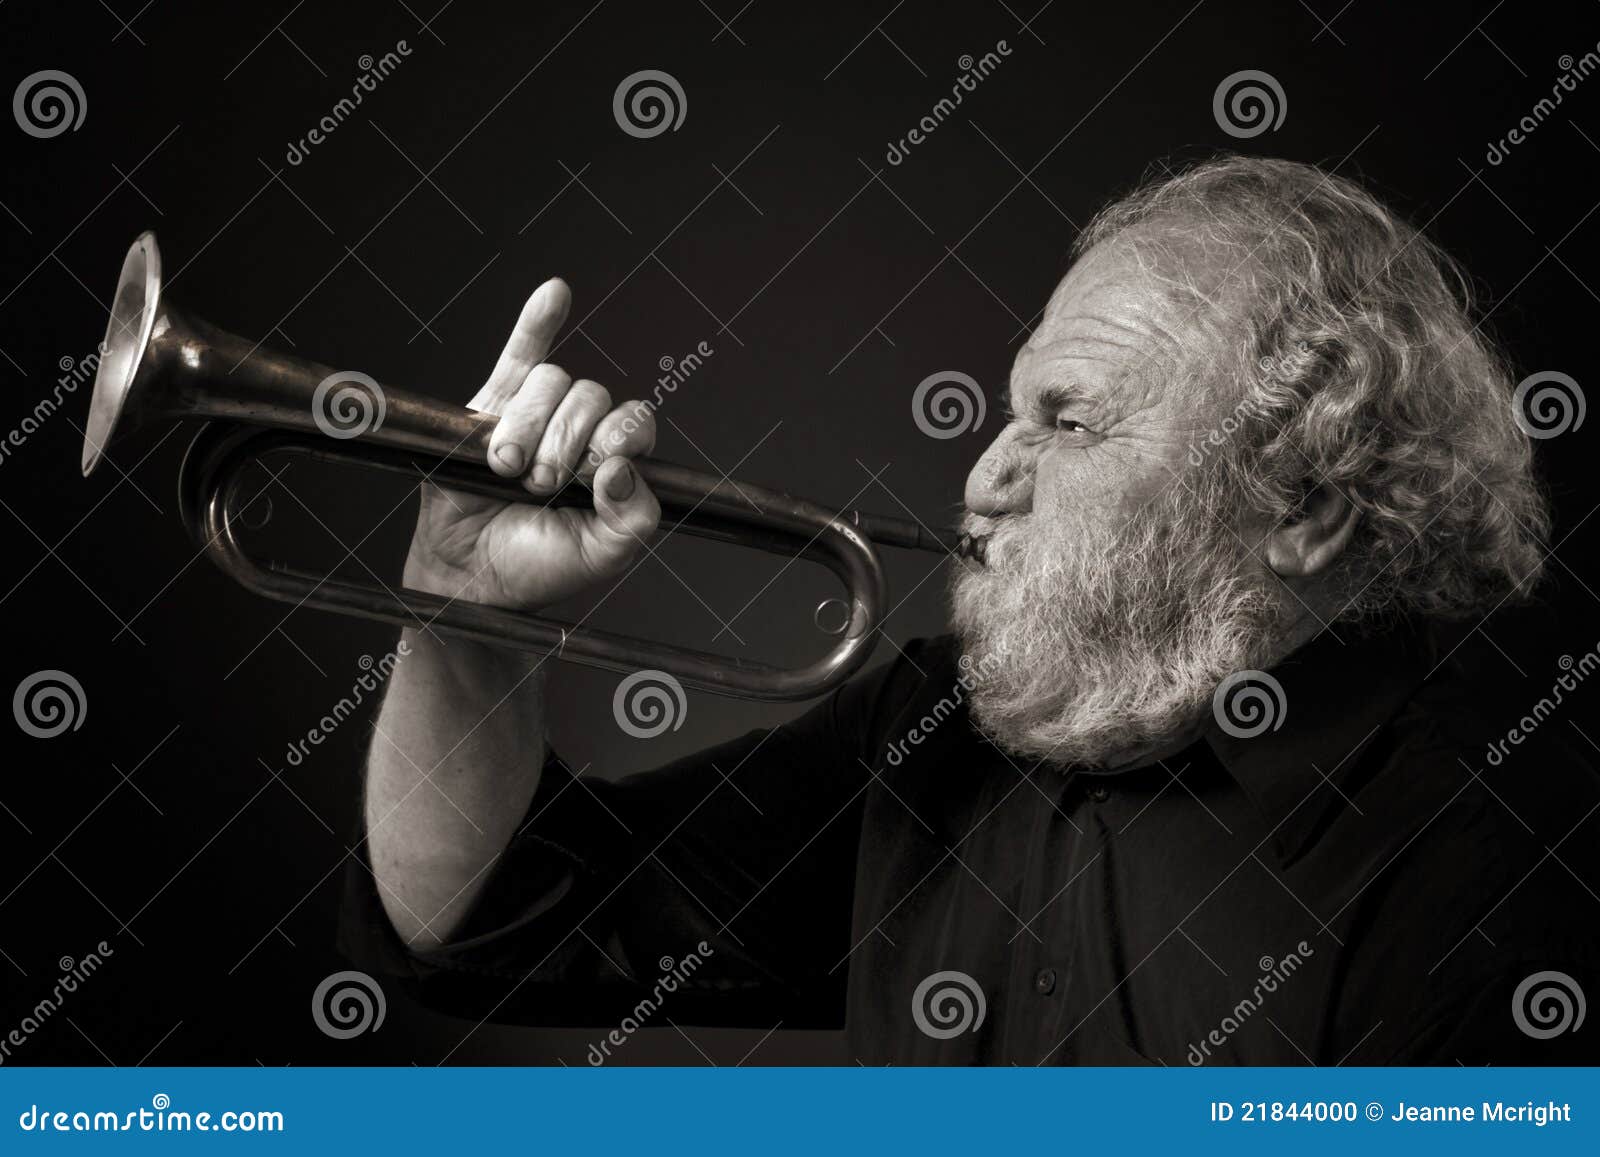 old man blowing a bugle with gusto